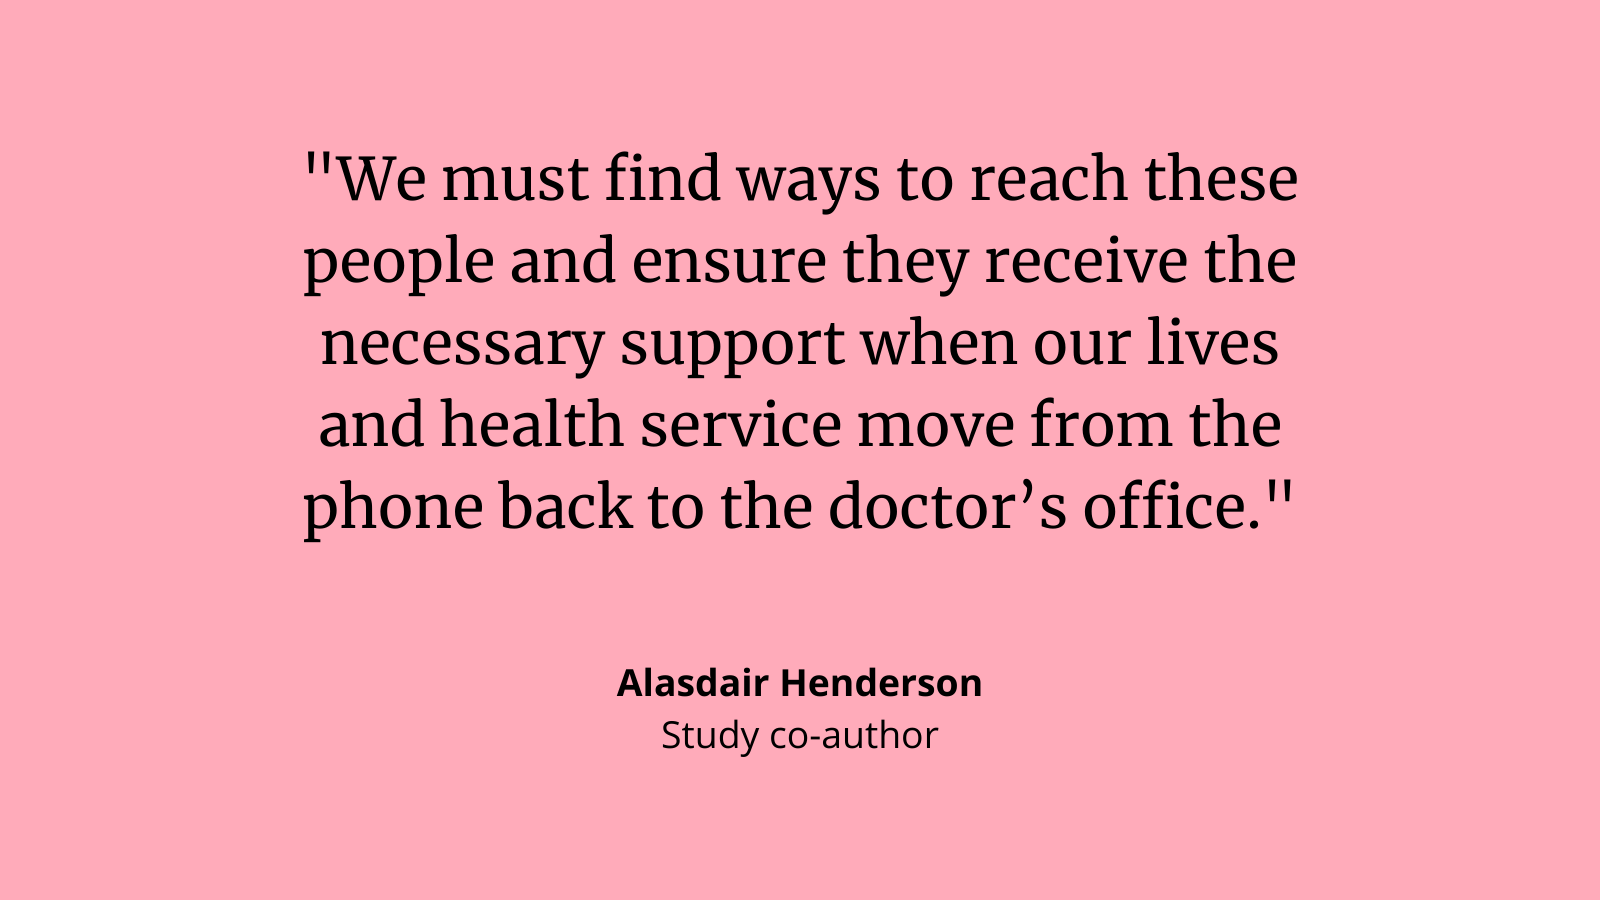 Alasdair Henderson: &quot;We must find ways to reach these people and ensure they receive the necessary support when our lives and health service move from the phone back to the doctor’s office.&quot;